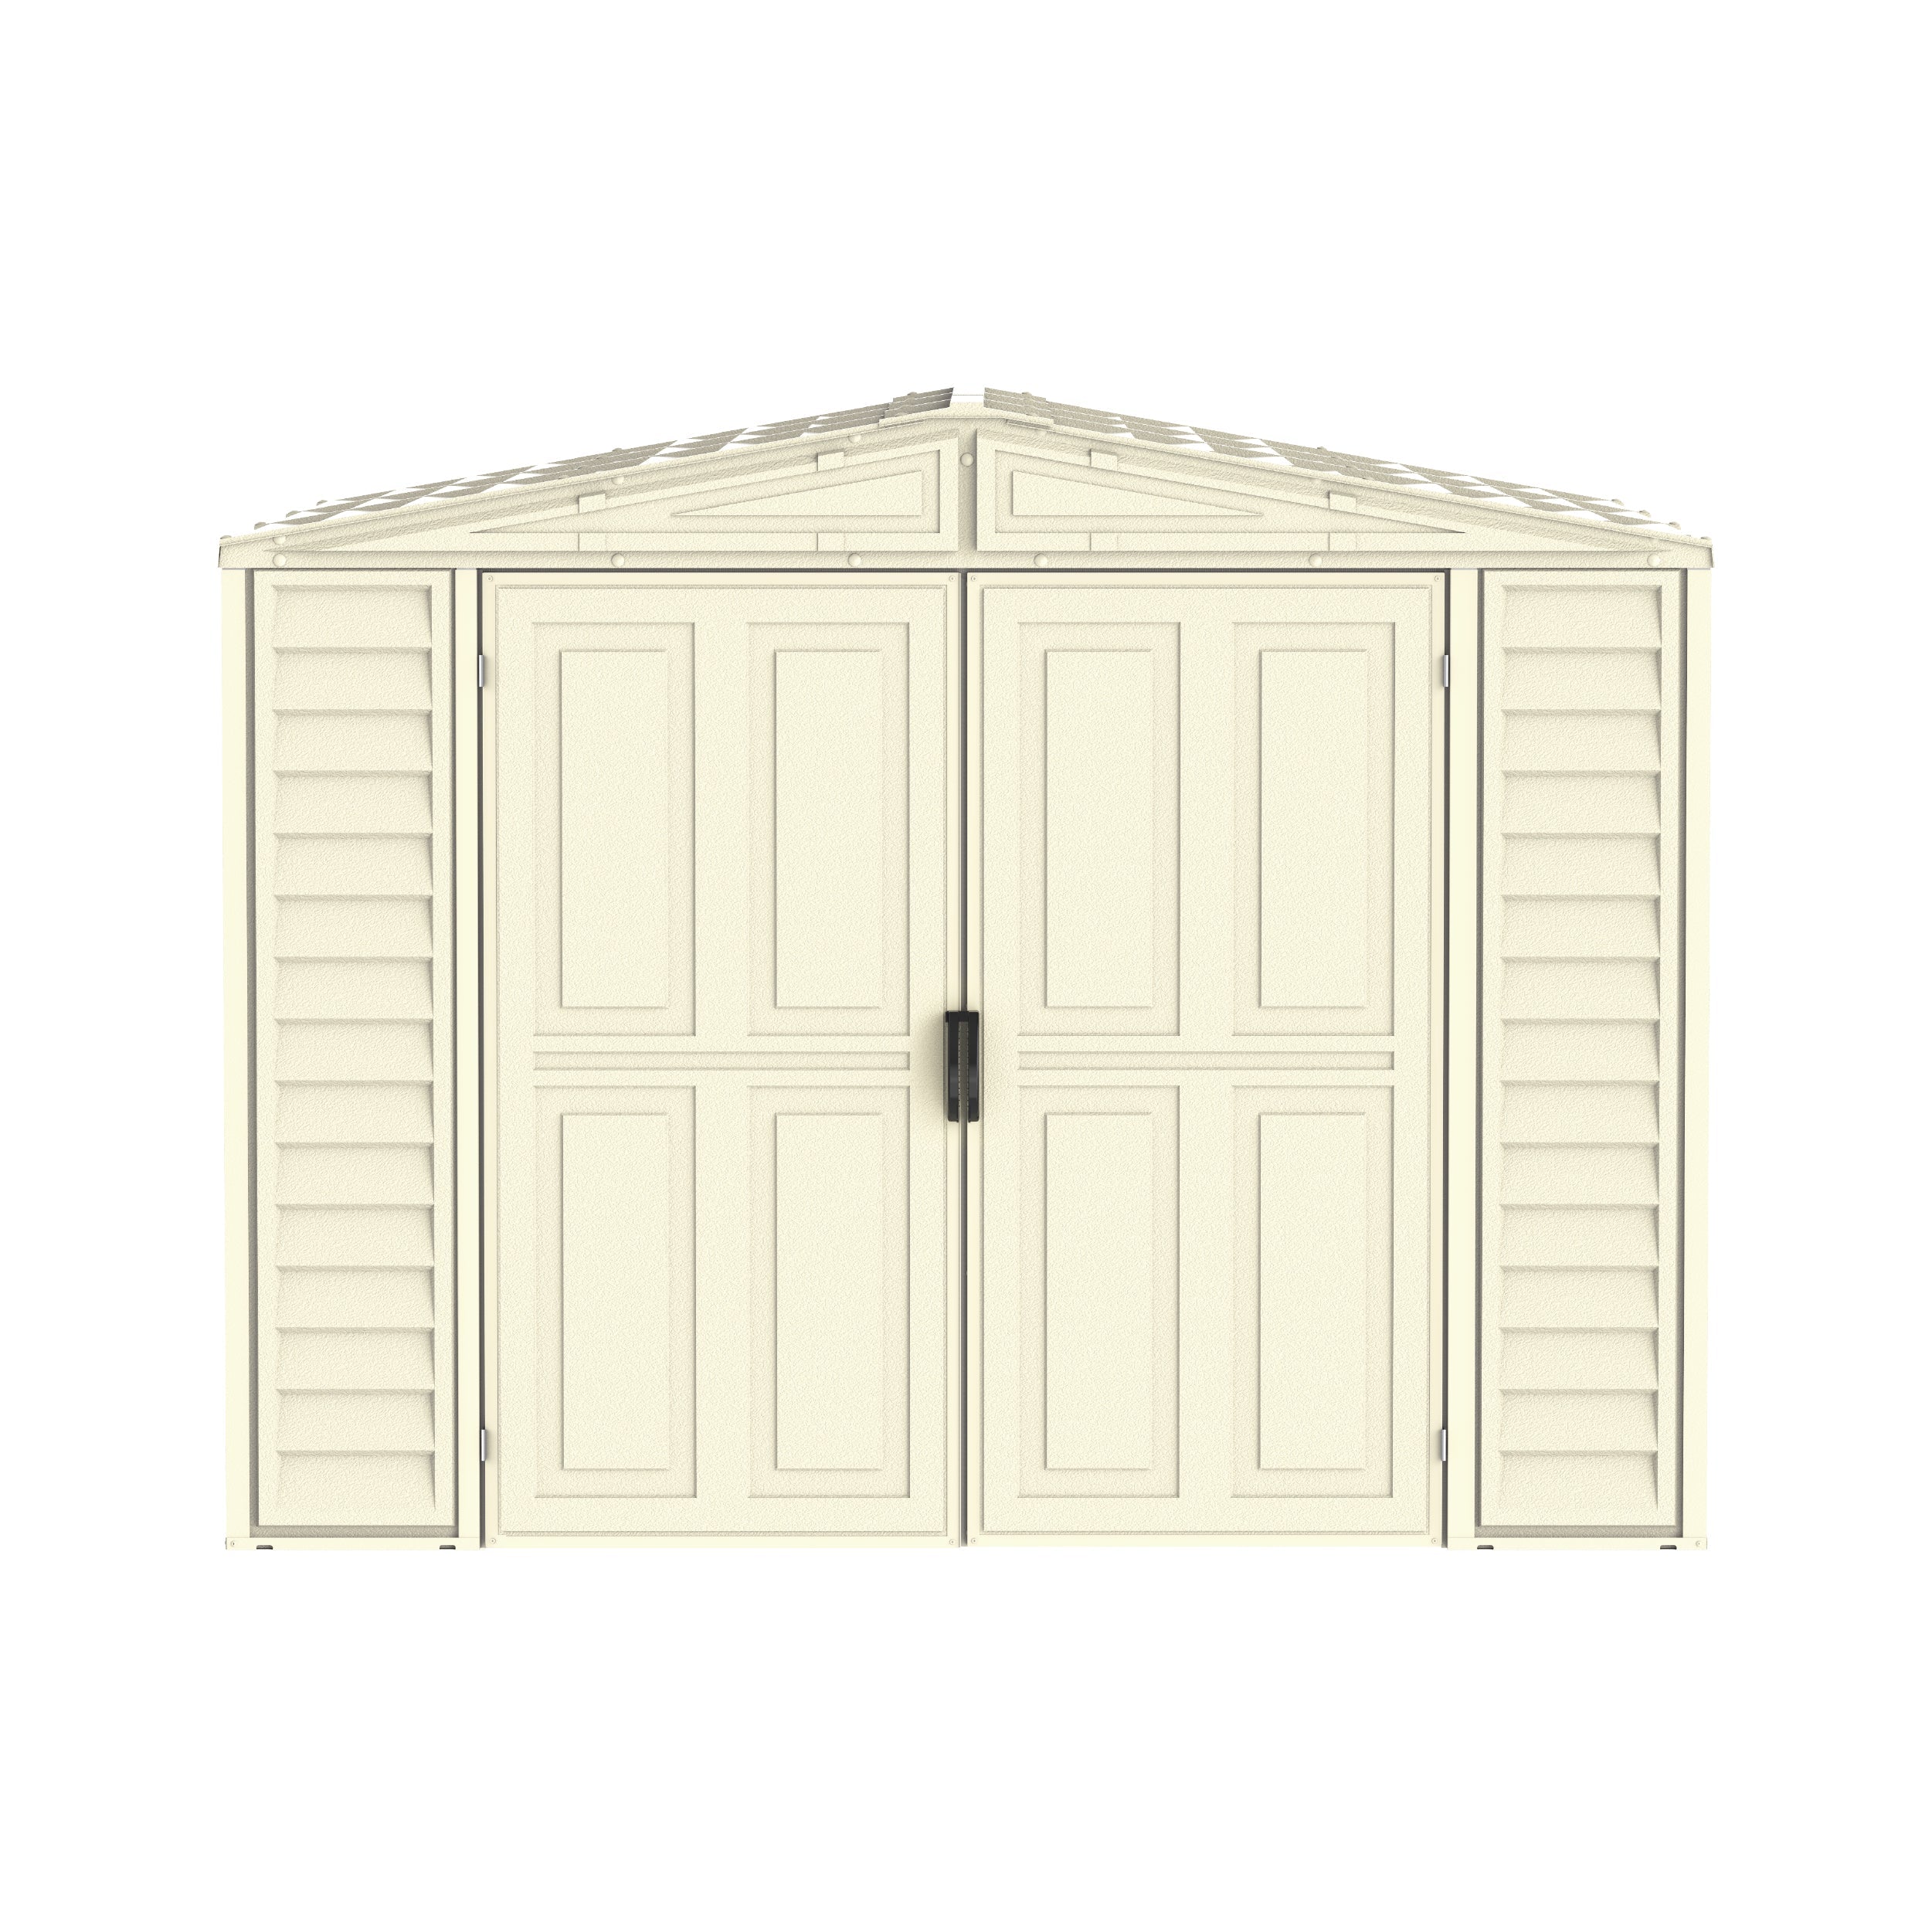 DuraMate 8x8ft (239.7 x241.8x187.5 cm) Resin Storage Shed